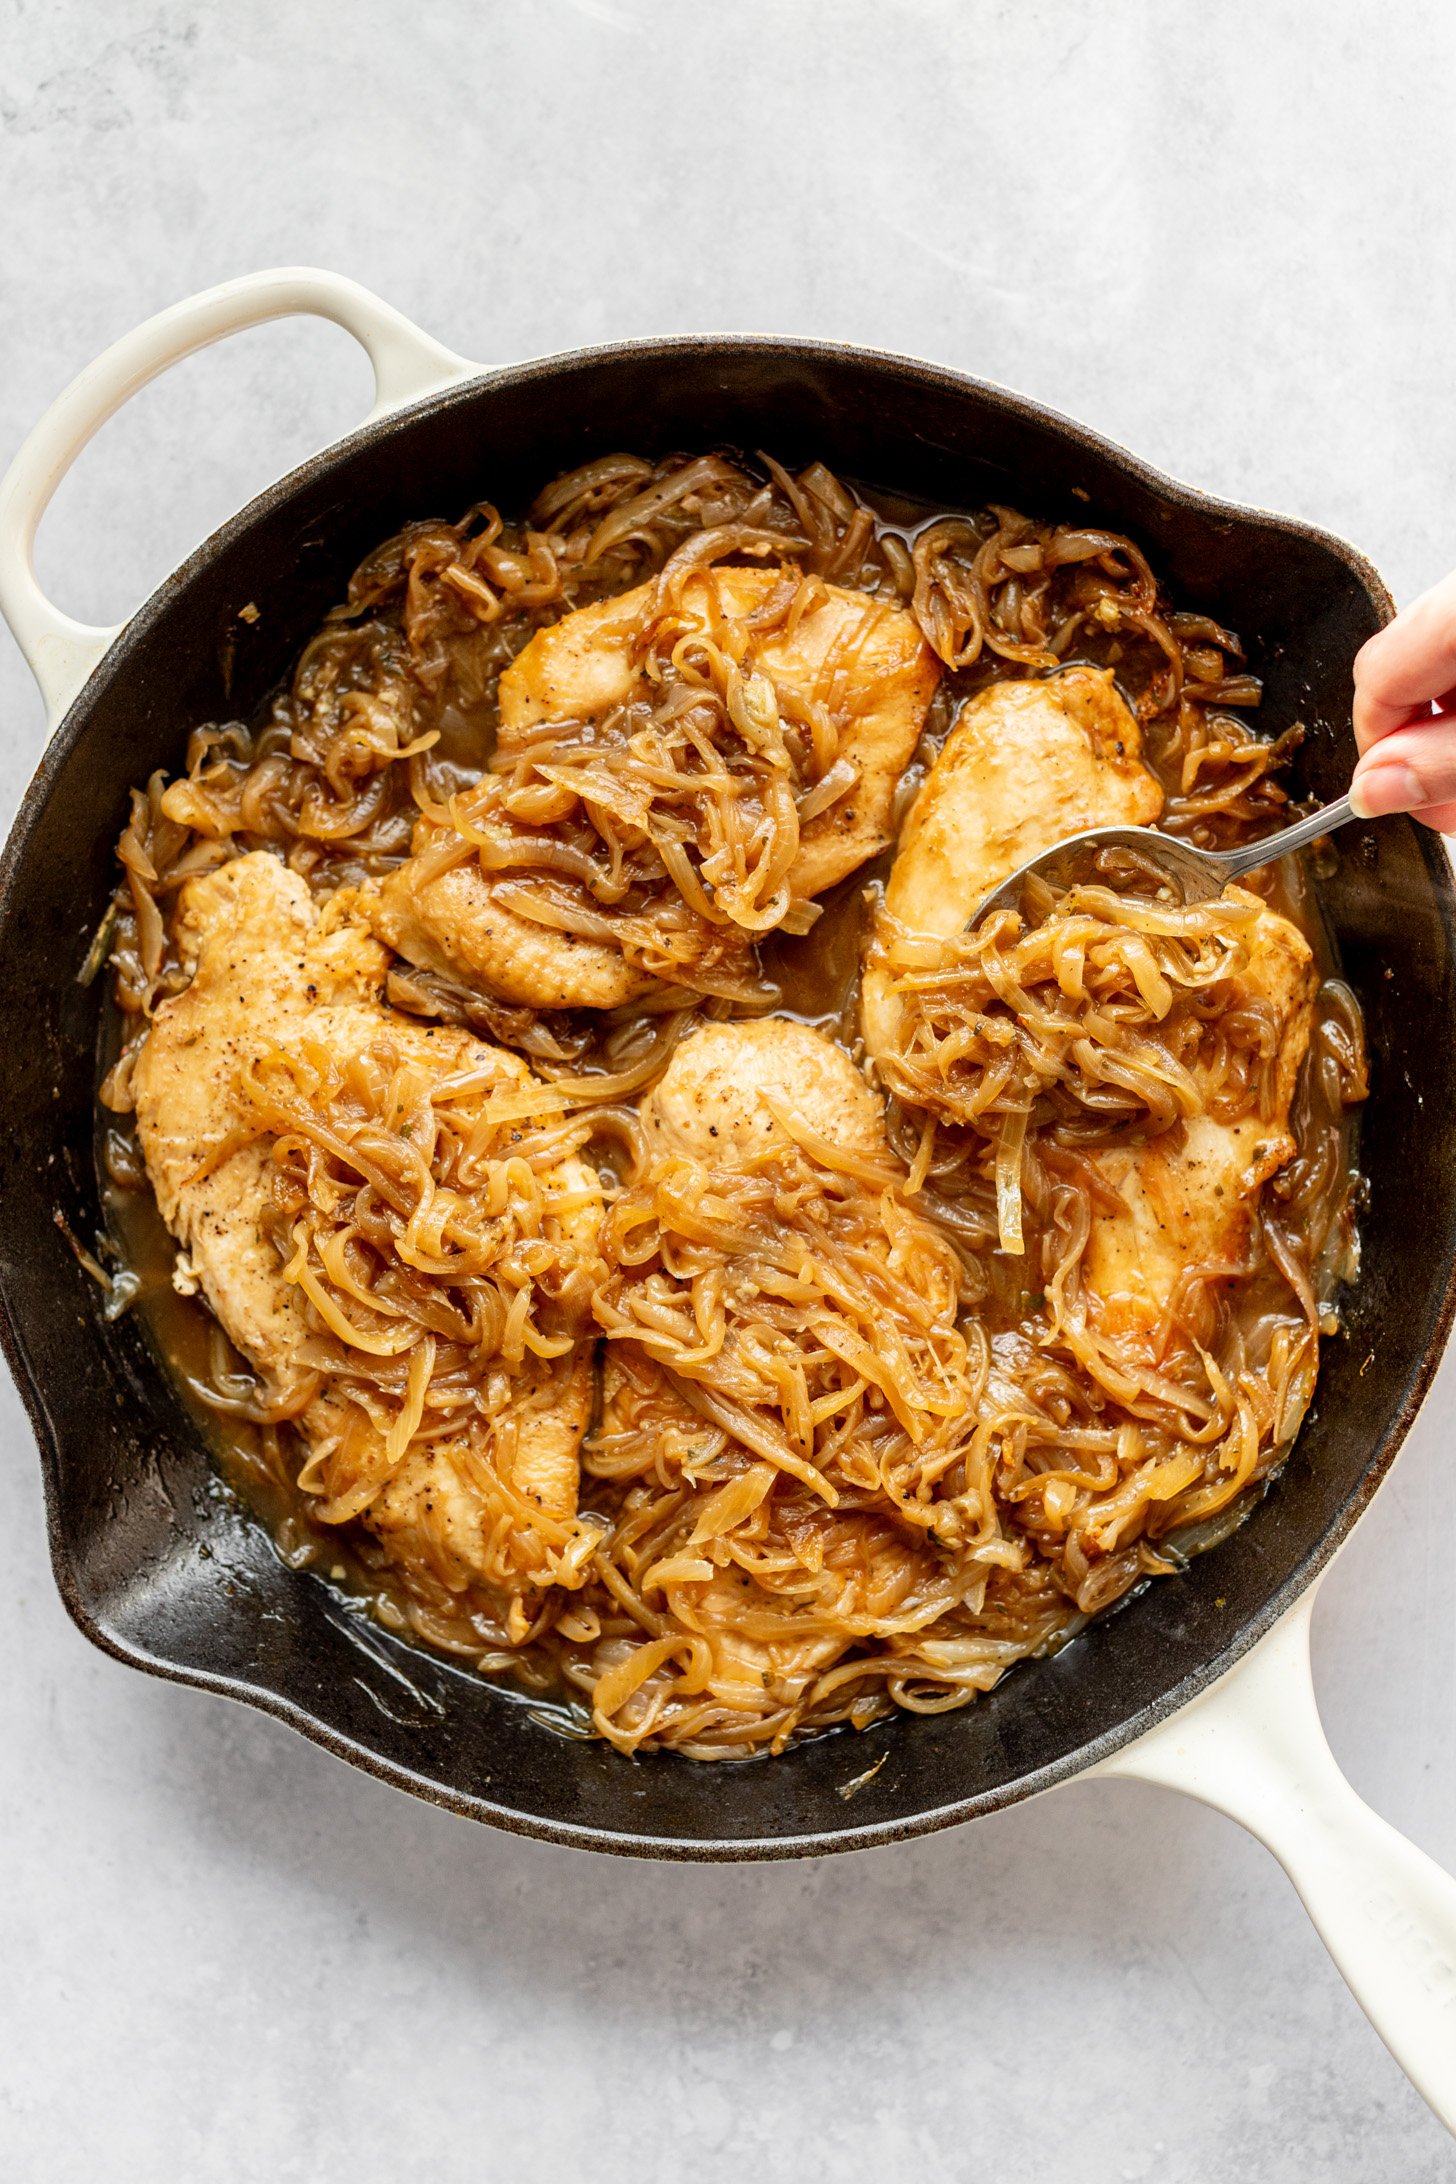 A cast iron skillet filled with caramelized onions and cooked chicken breast being stirred with a spoon. The skillet is sitting on a countertop.